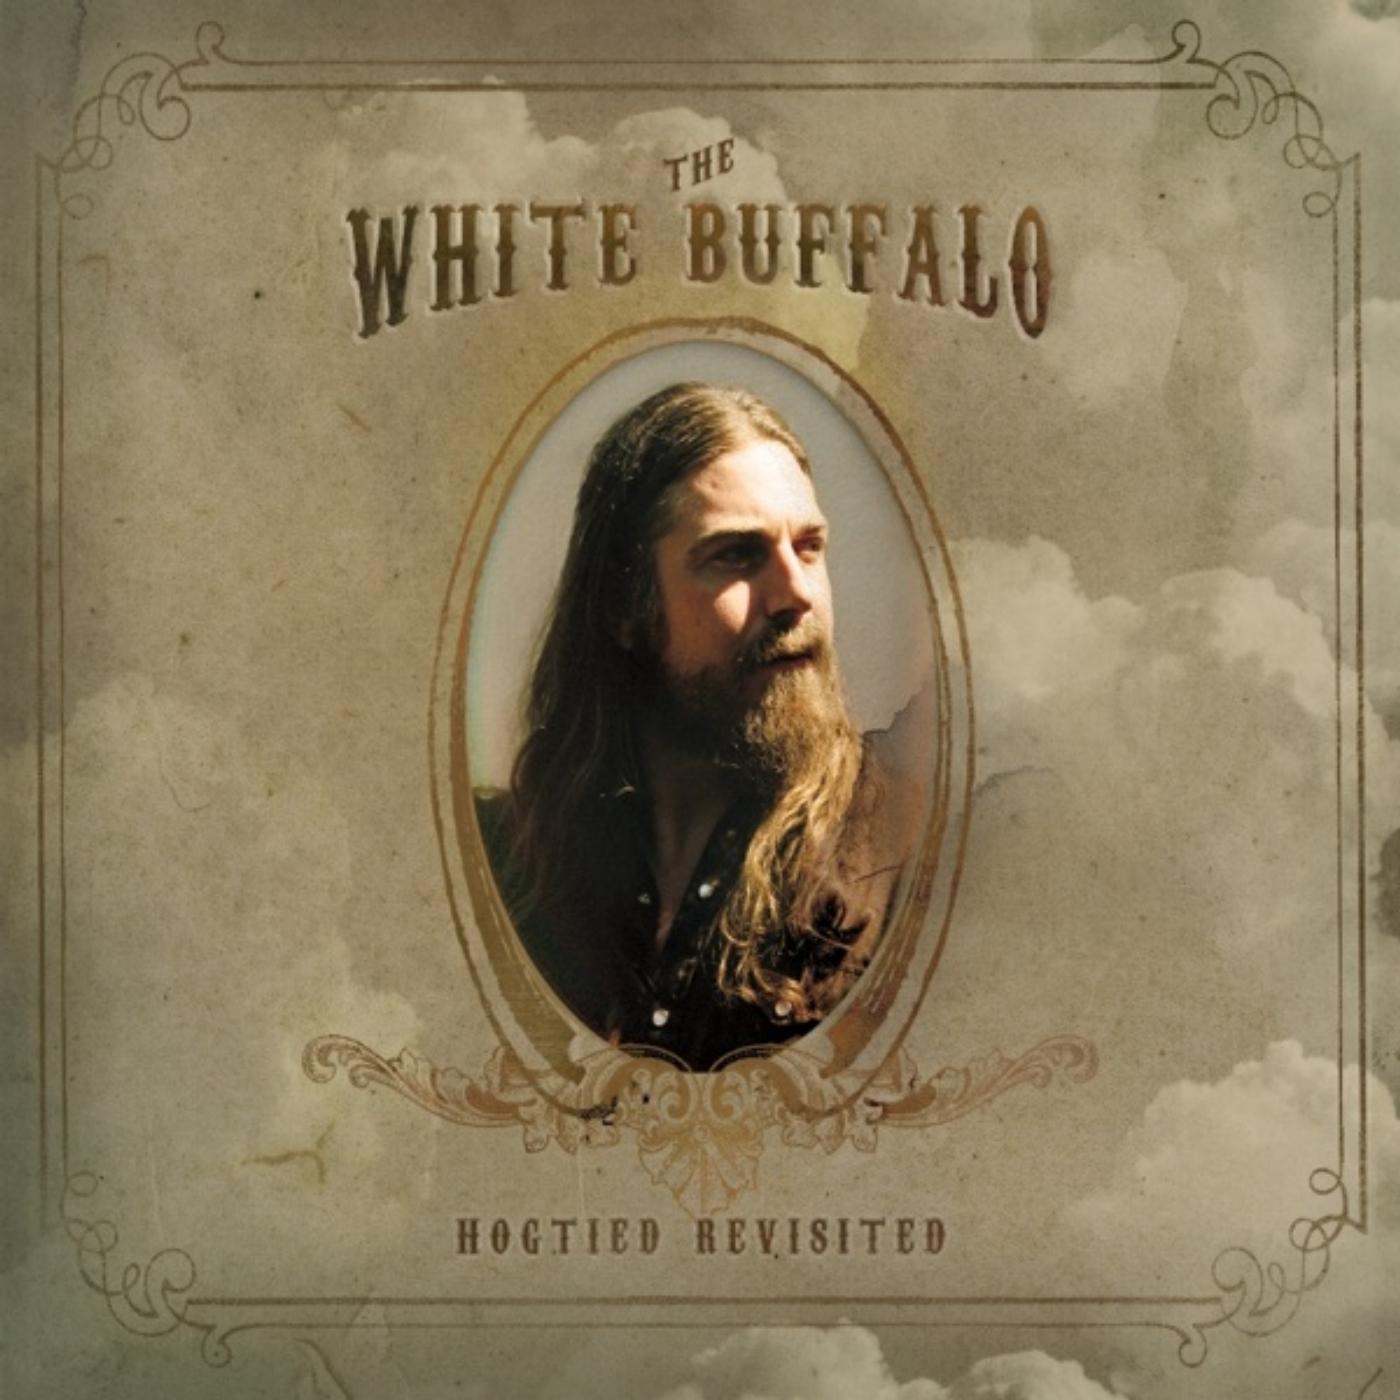 White-Buffalo-The---Hogtied-Revisited-lp